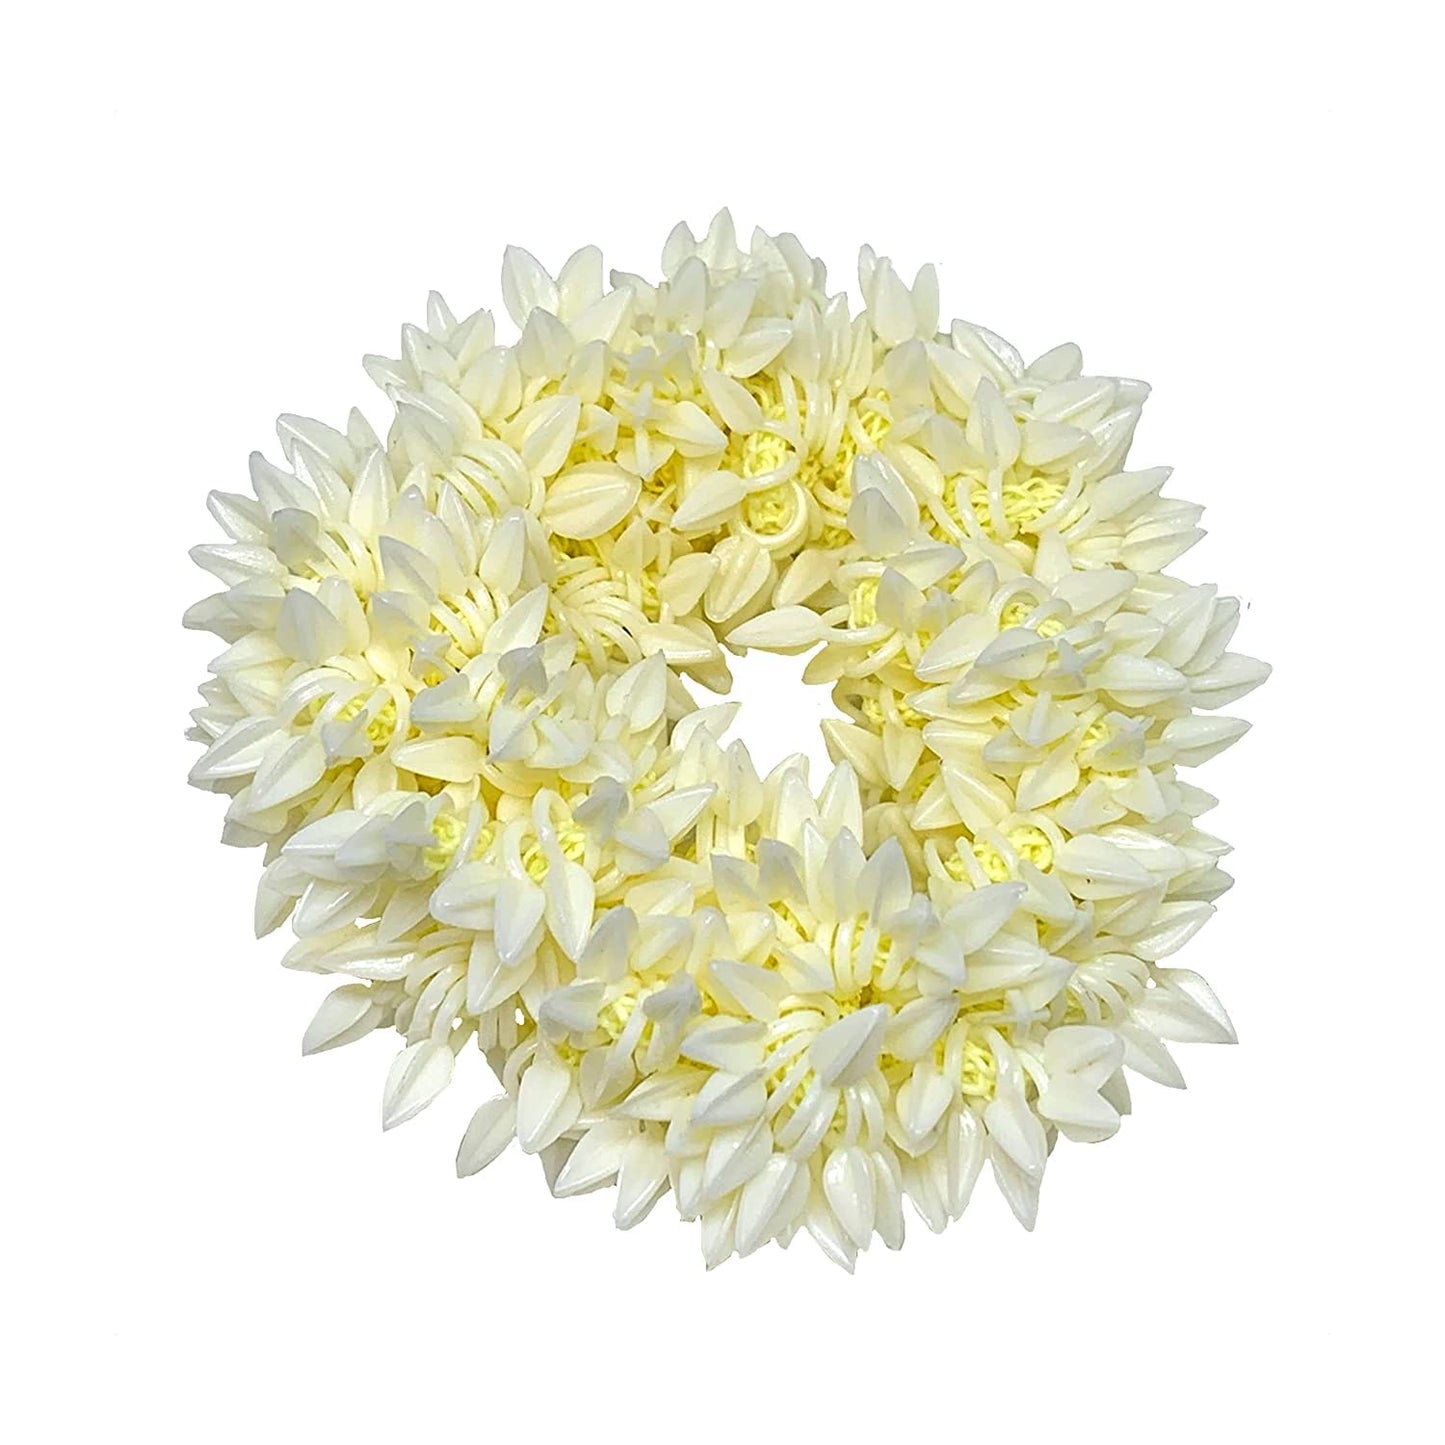 Fashion Fitoor 2 Pcs Hair Mogra Scented Rubber Band Gajra Hair Accessories for Women Girls (35 GM) (White) (Free Size (30 GM), 4)